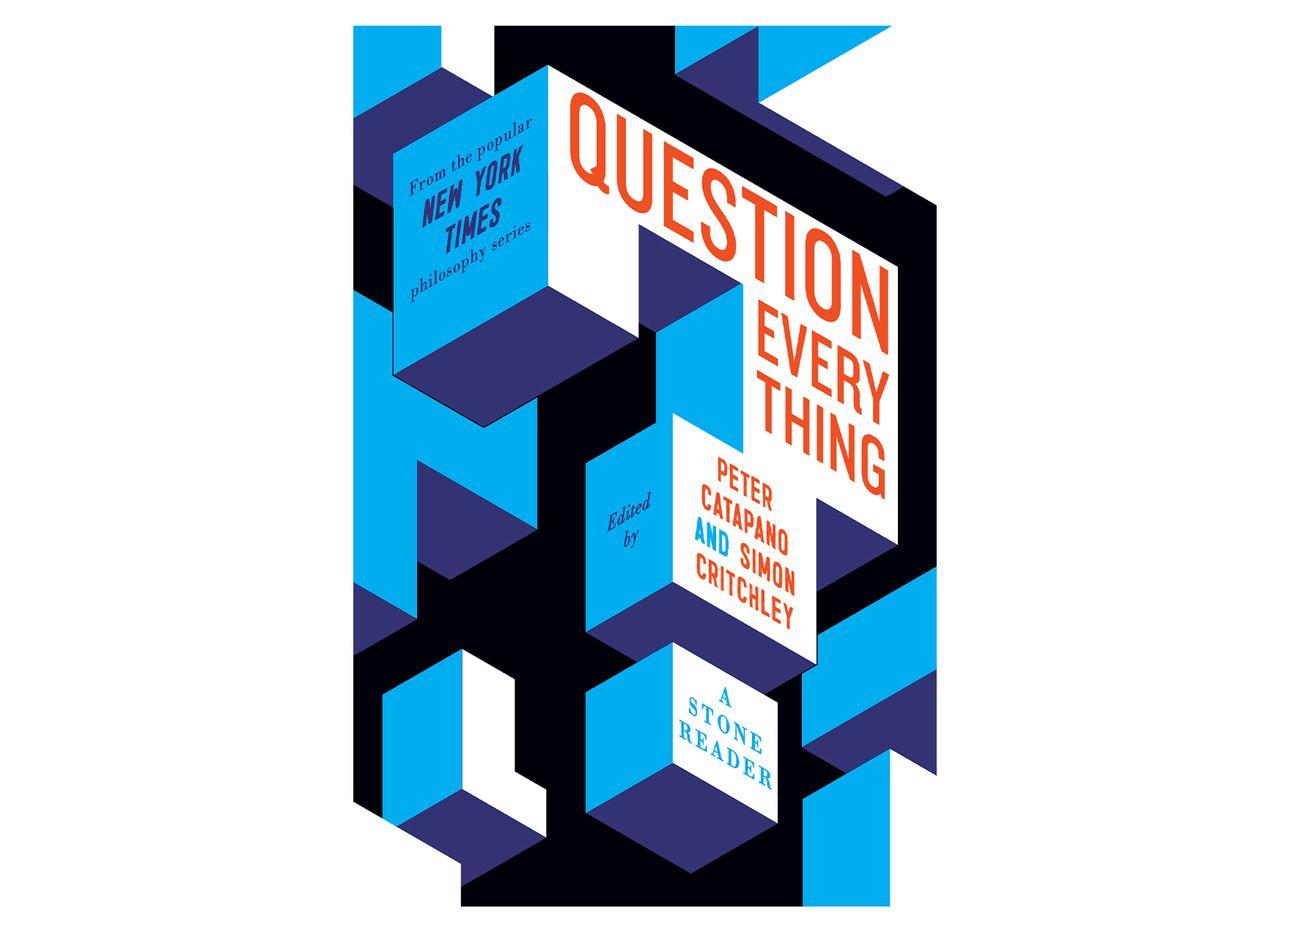 The cover of “Question Everything: A Stone Reader,” co-edited by Simon Critchley and Peter Catapano. (Courtesy Liveright)